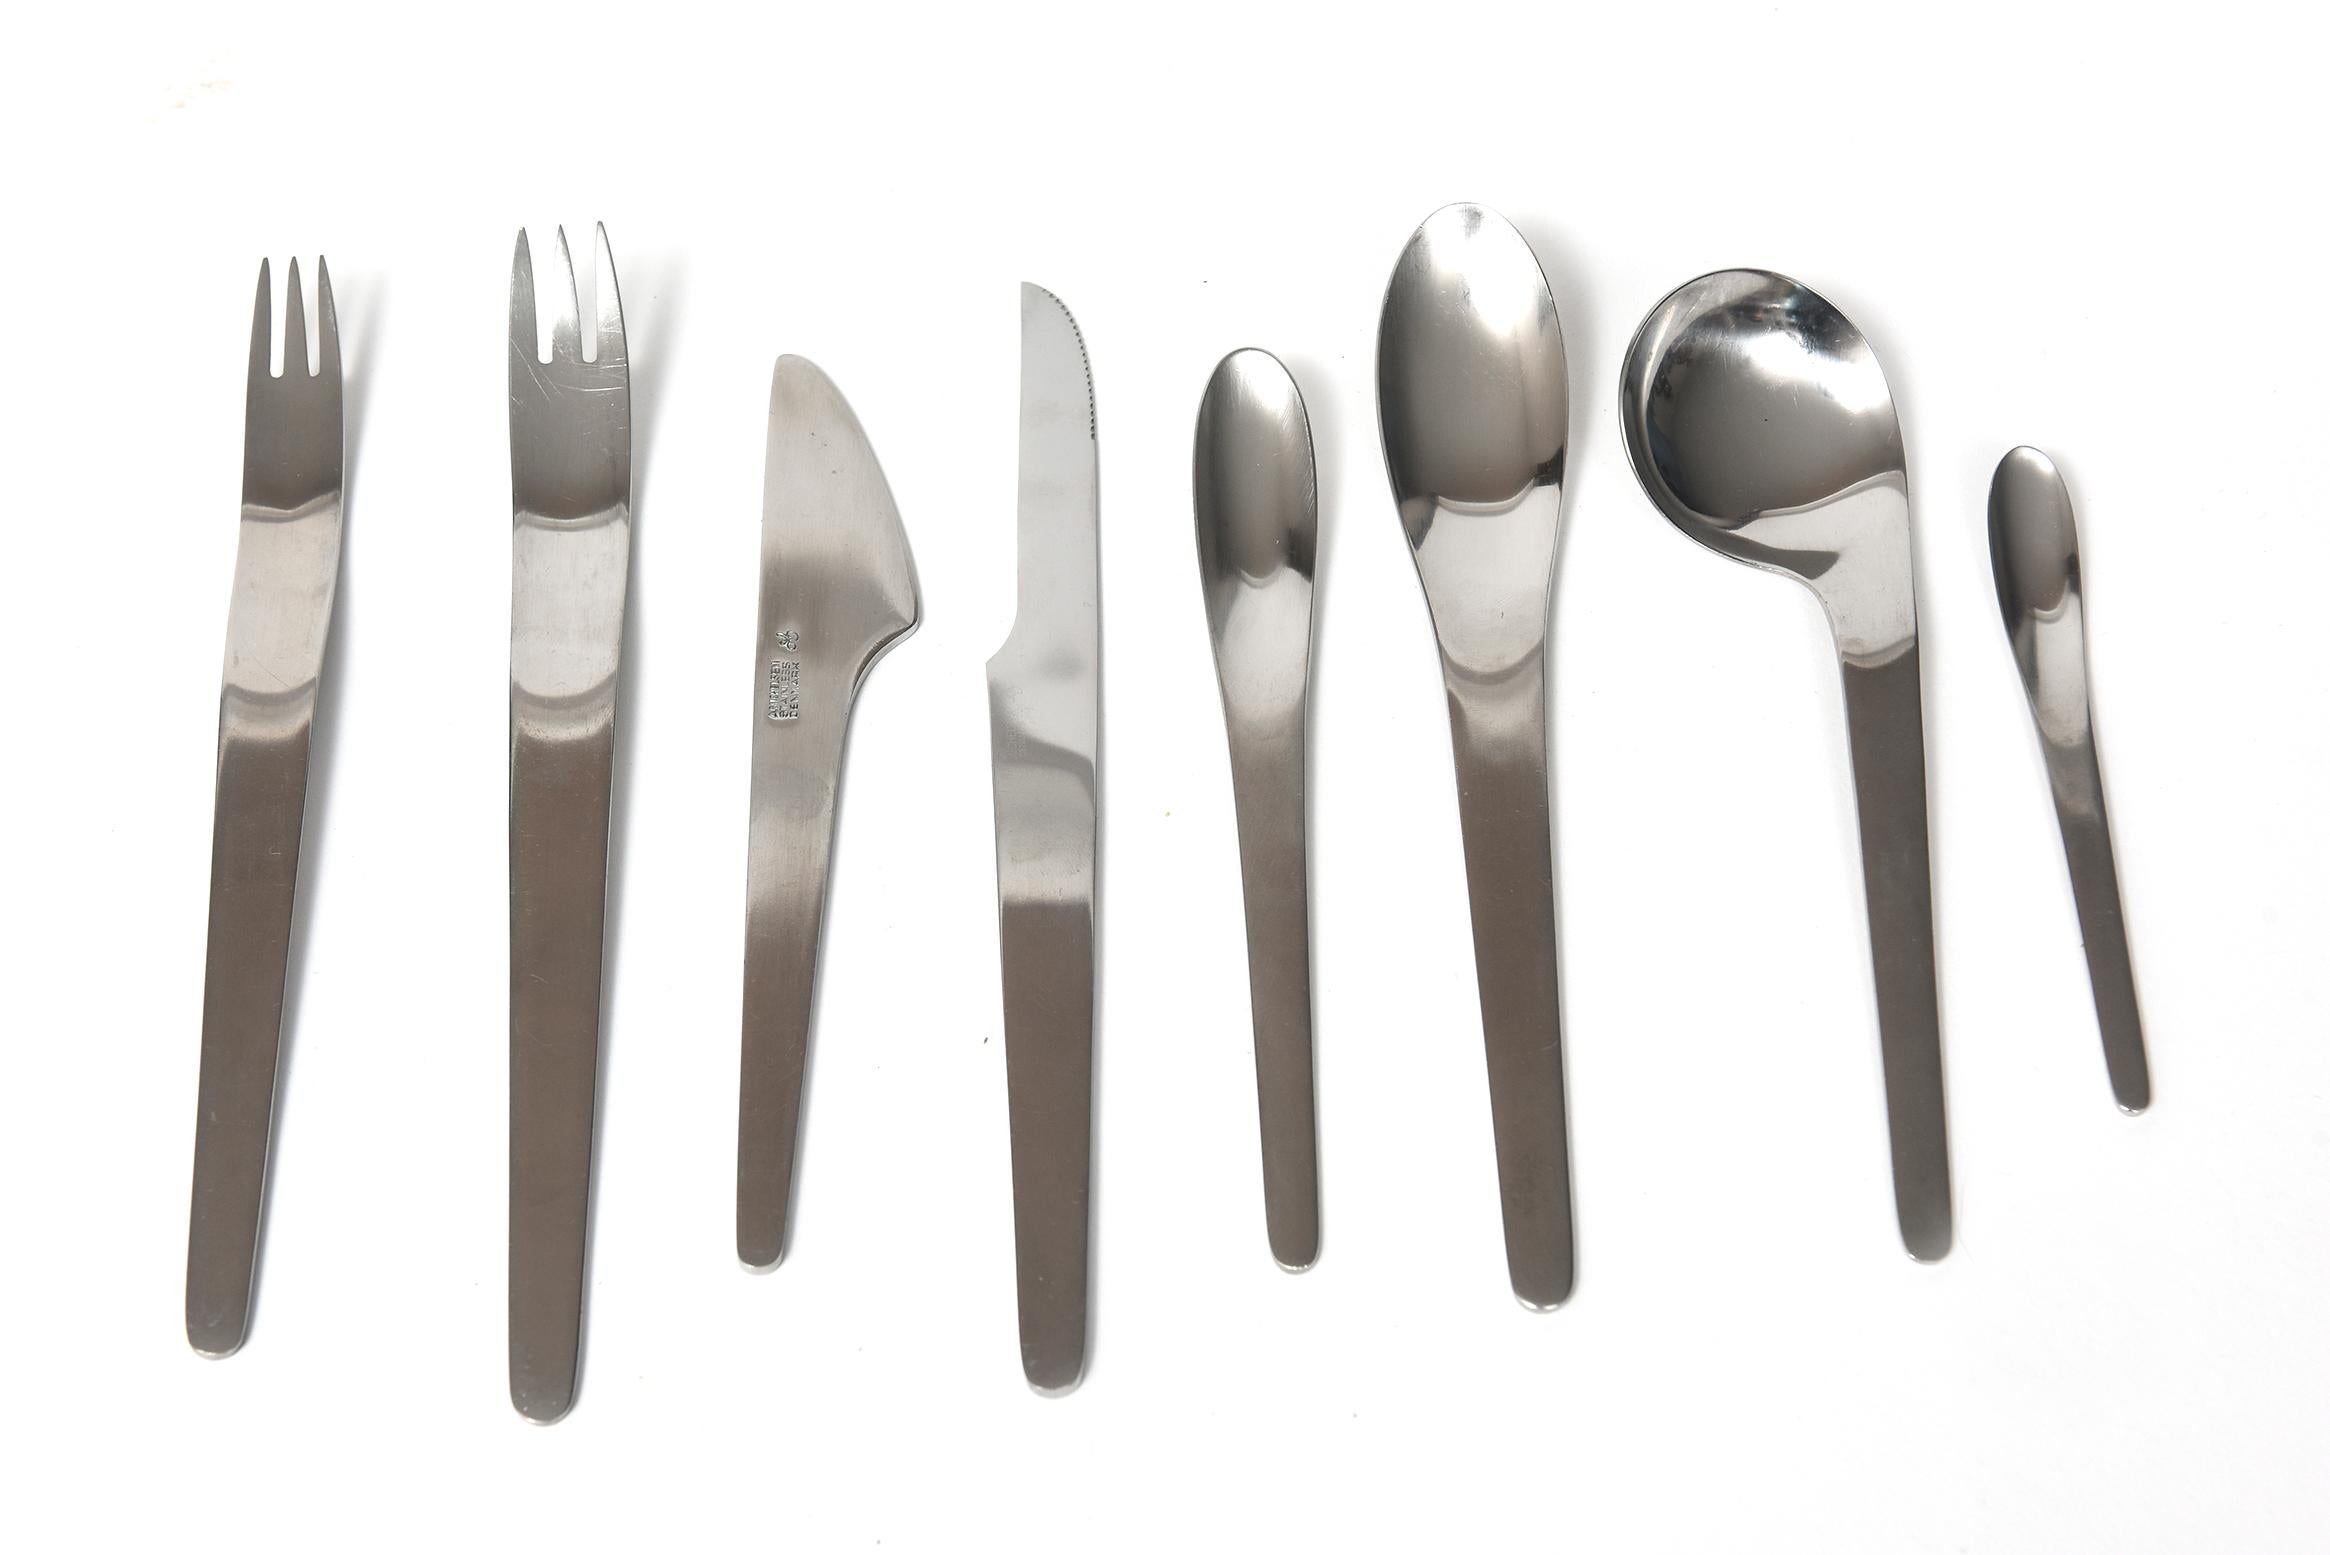 Arne Jacobsen by Michelsen Space Age Modernist Stainless Flatware Set 106 Pieces 2